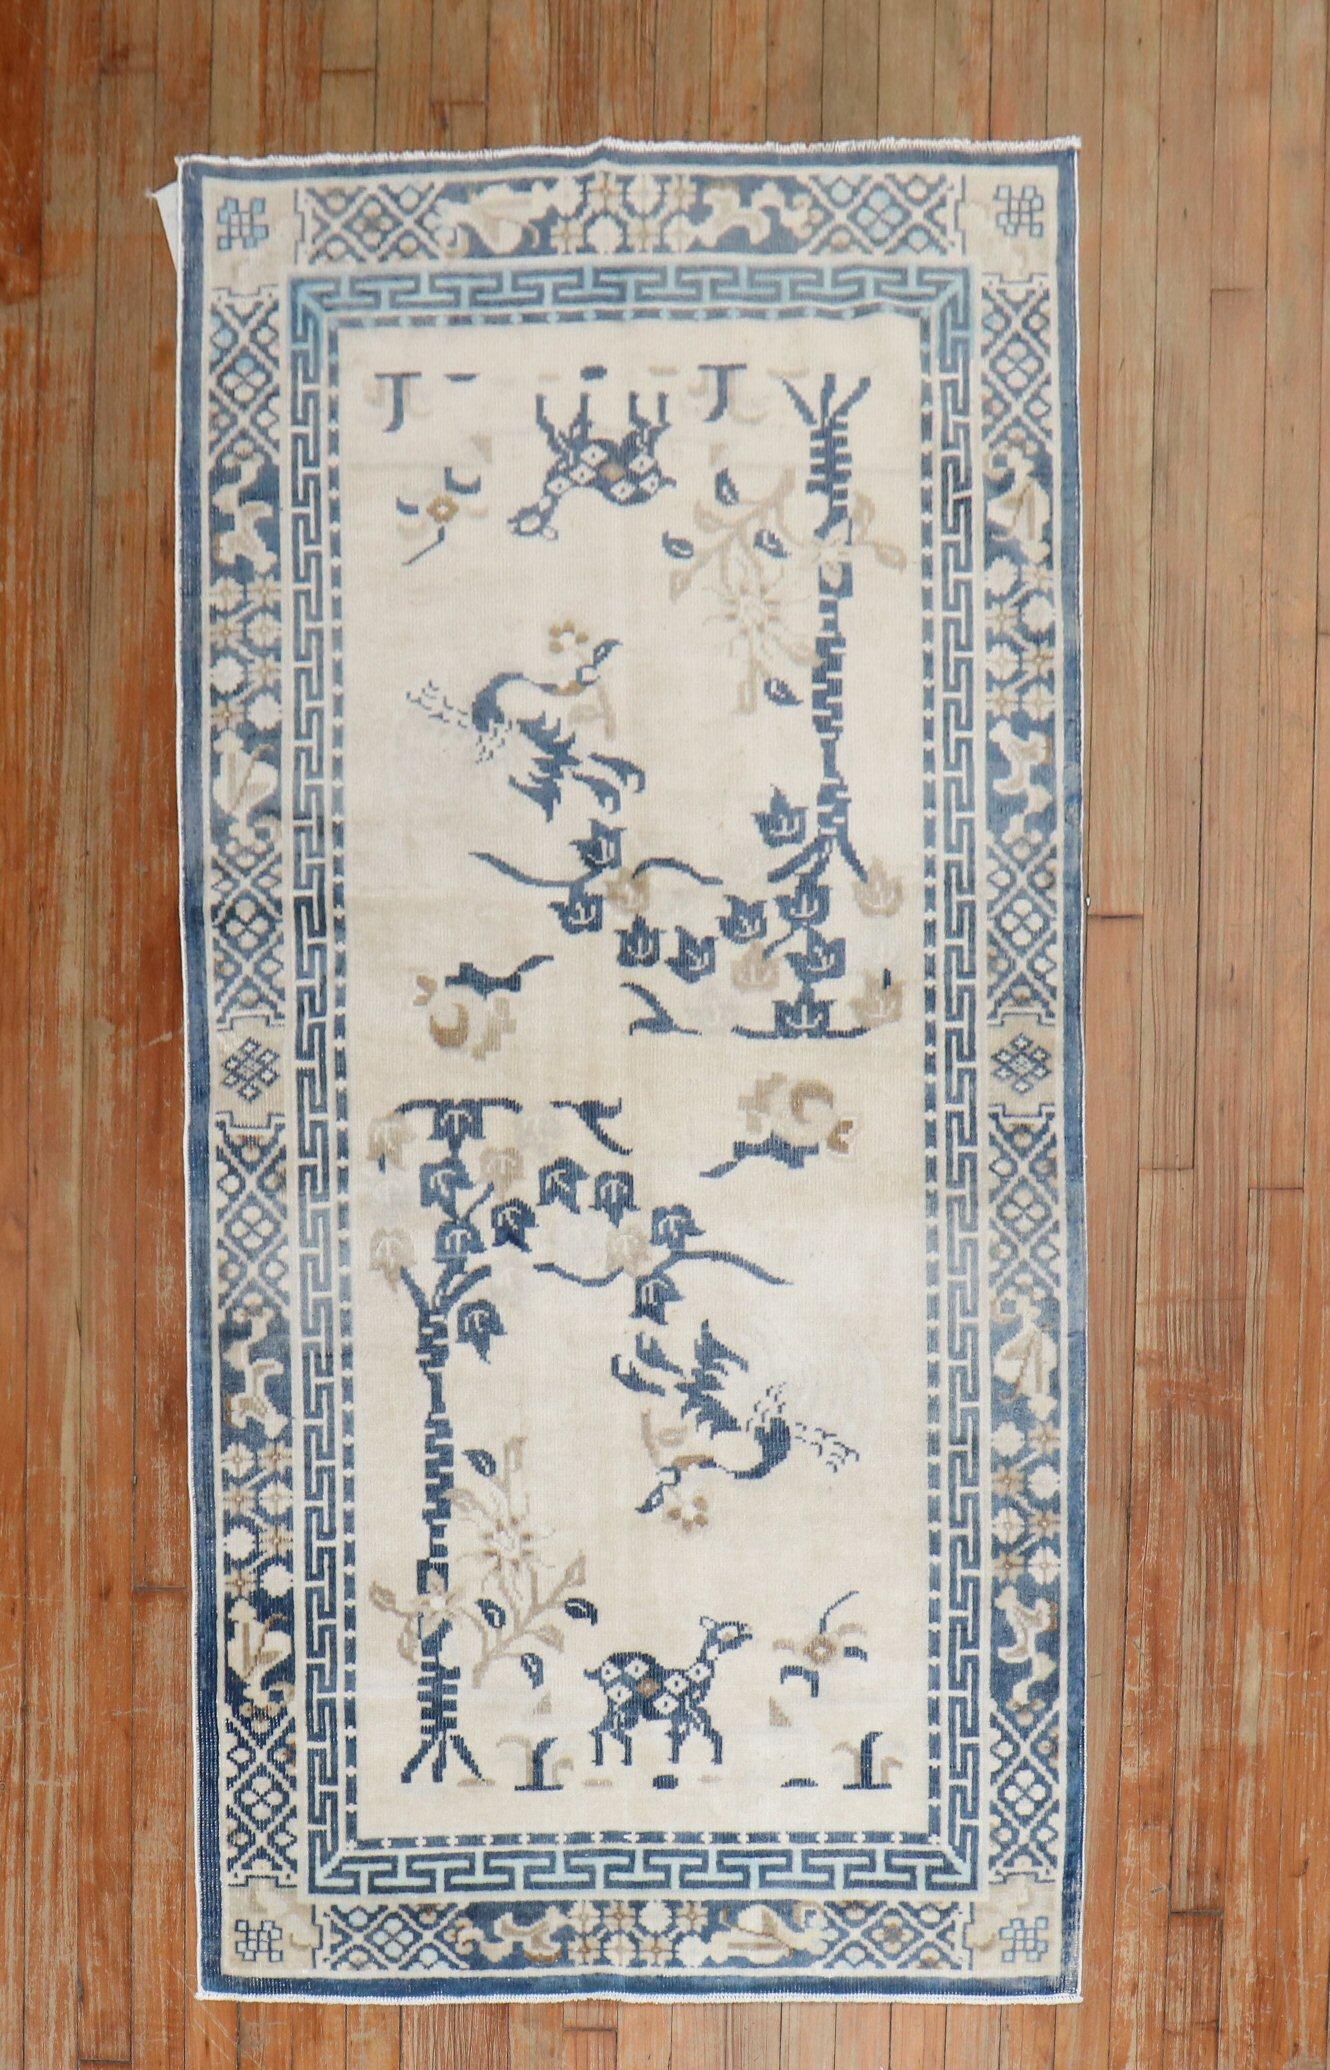 A mid20th-century Chinese Peking carpet with an animal motif in white and blue

circa 1950, measures: 3'1' x 5'8